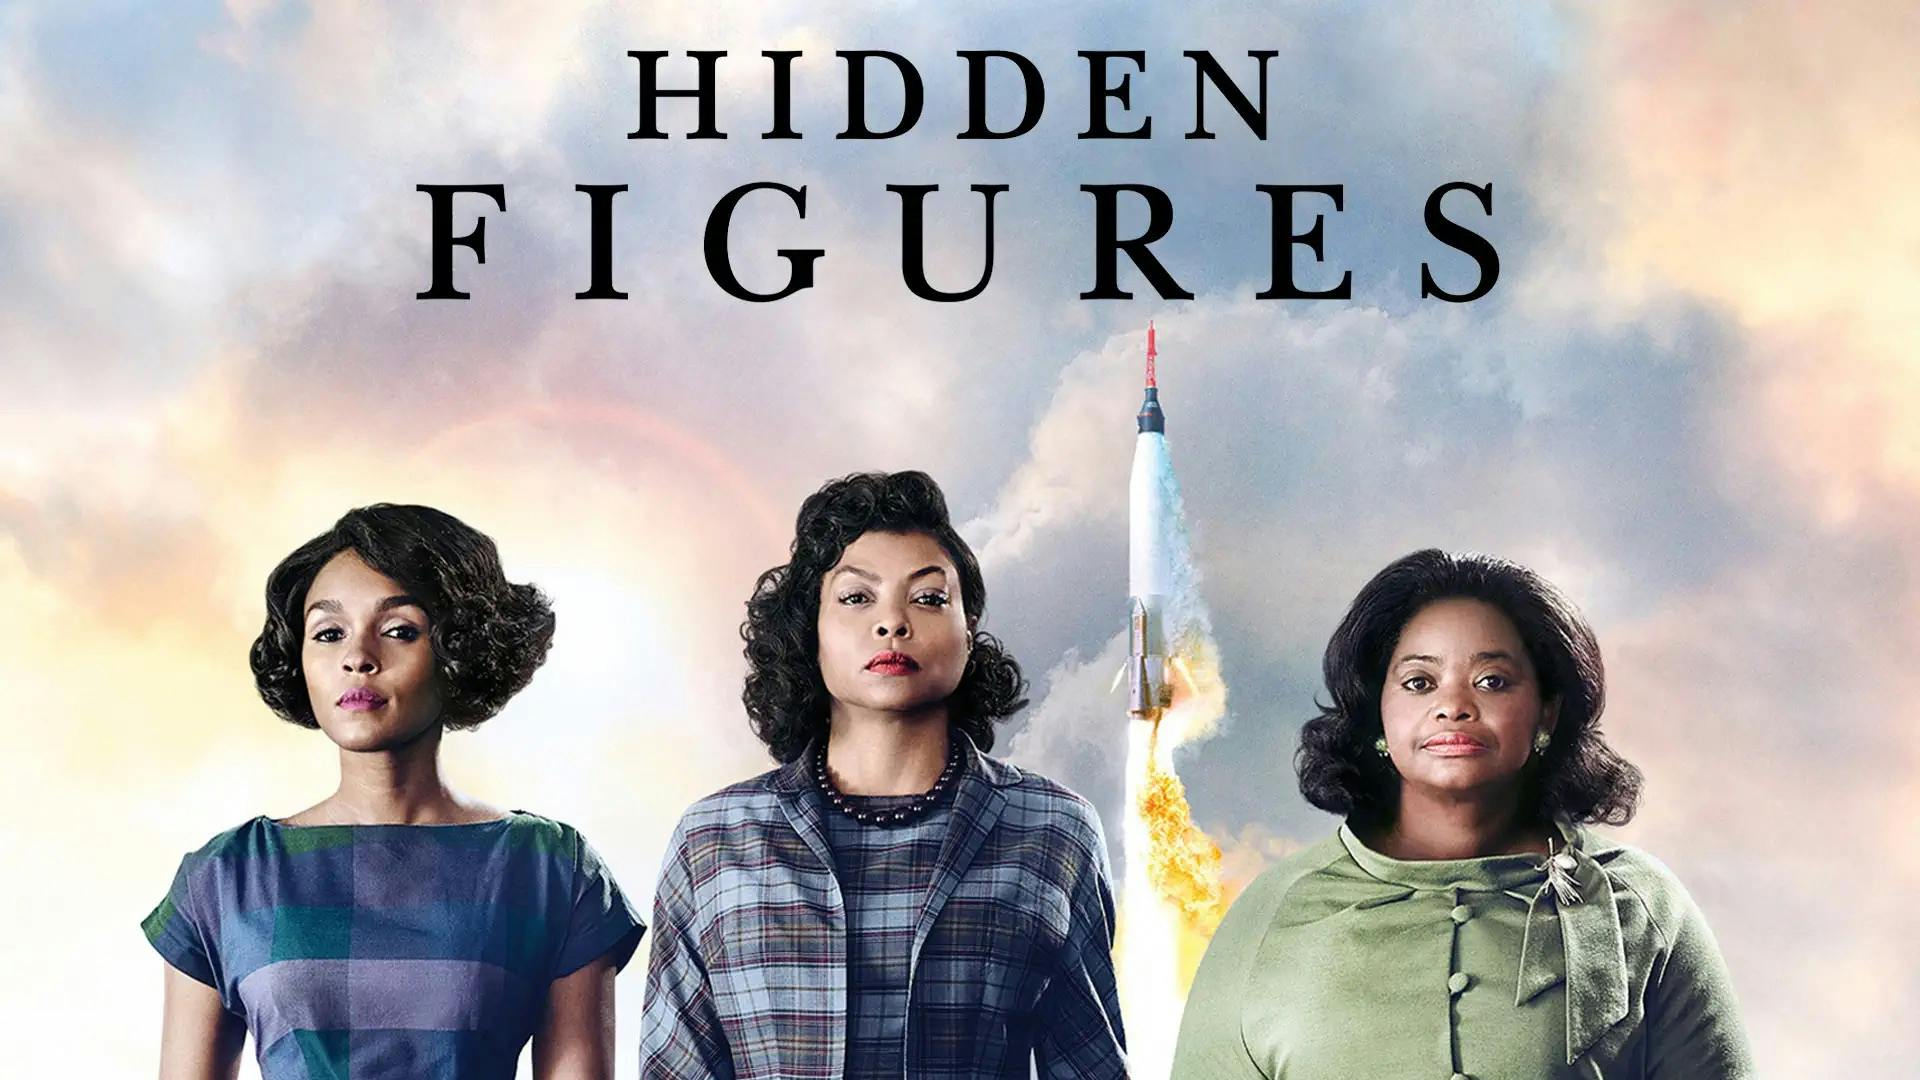 The thumbnail cover for the movie Hidden Figures